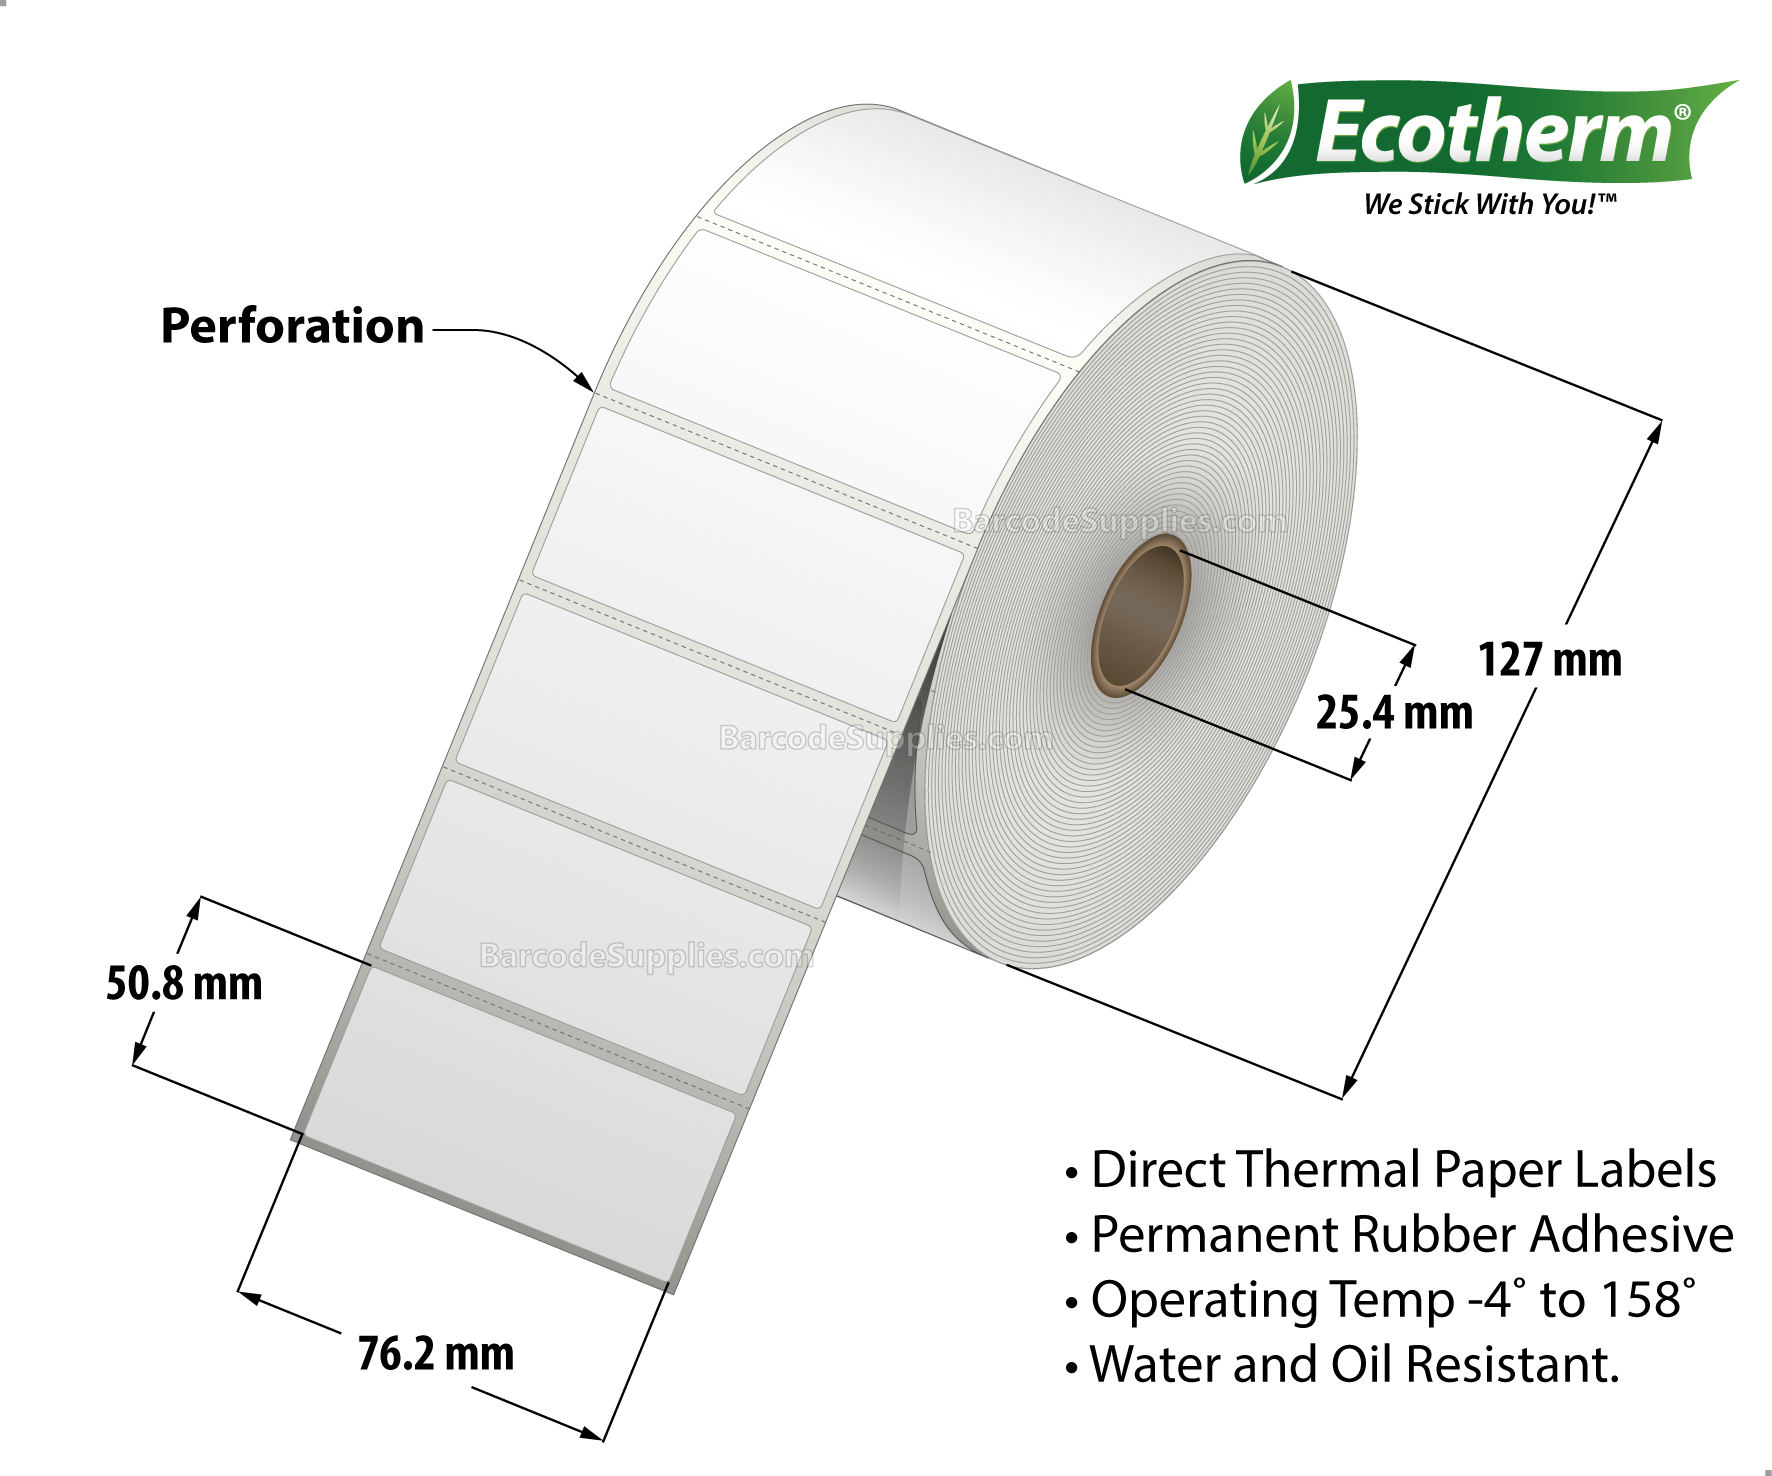 3 x 2 Direct Thermal White Labels With Rubber Adhesive - Perforated - 1240 Labels Per Roll - Carton Of 6 Rolls - 7440 Labels Total - MPN: ECOTHERM15139-6